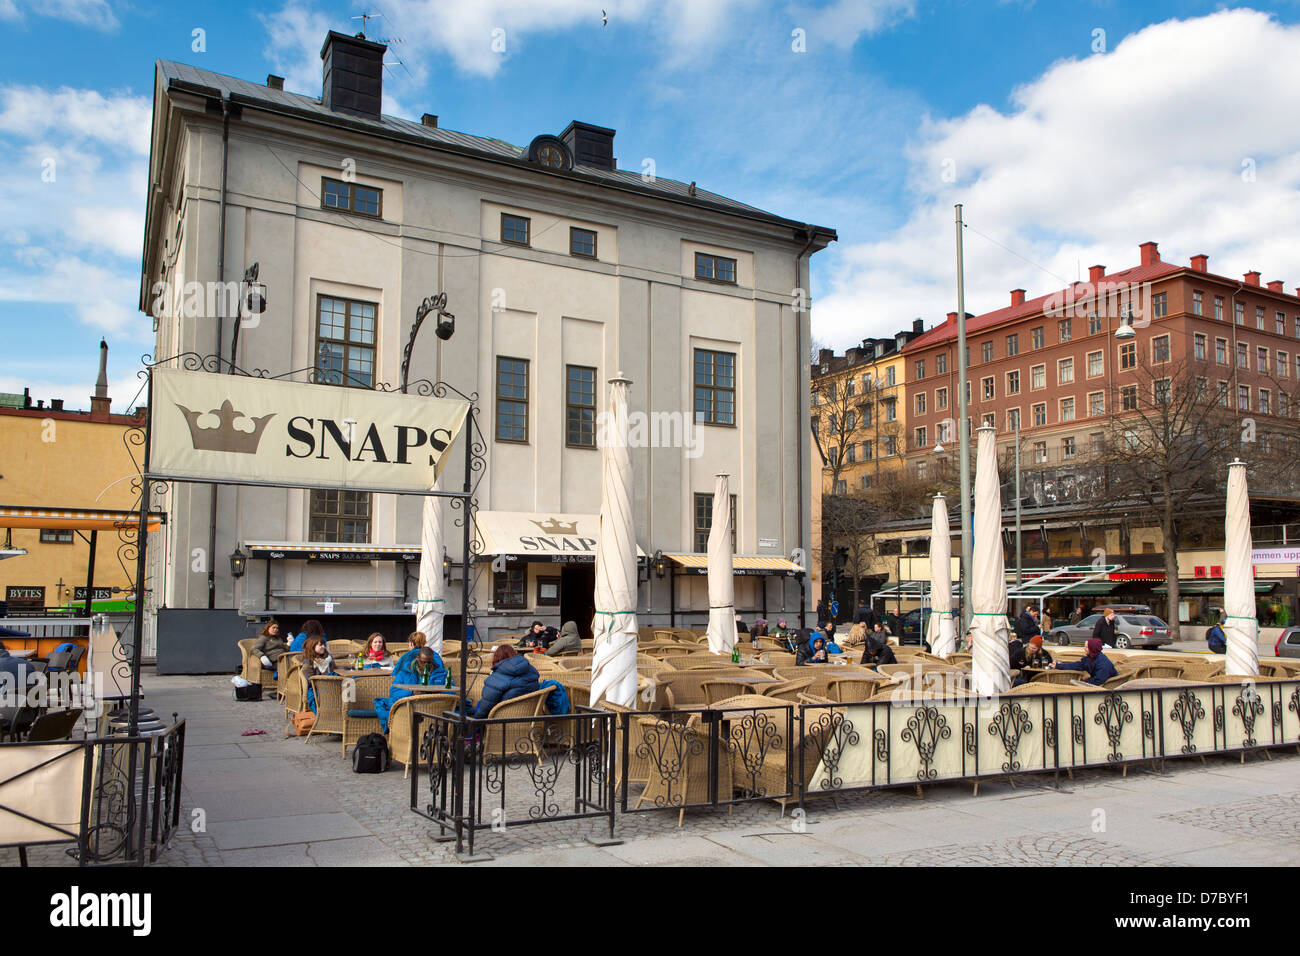 Snaps, Bar and grill in Stockholm, Sweden Stock Photo - Alamy